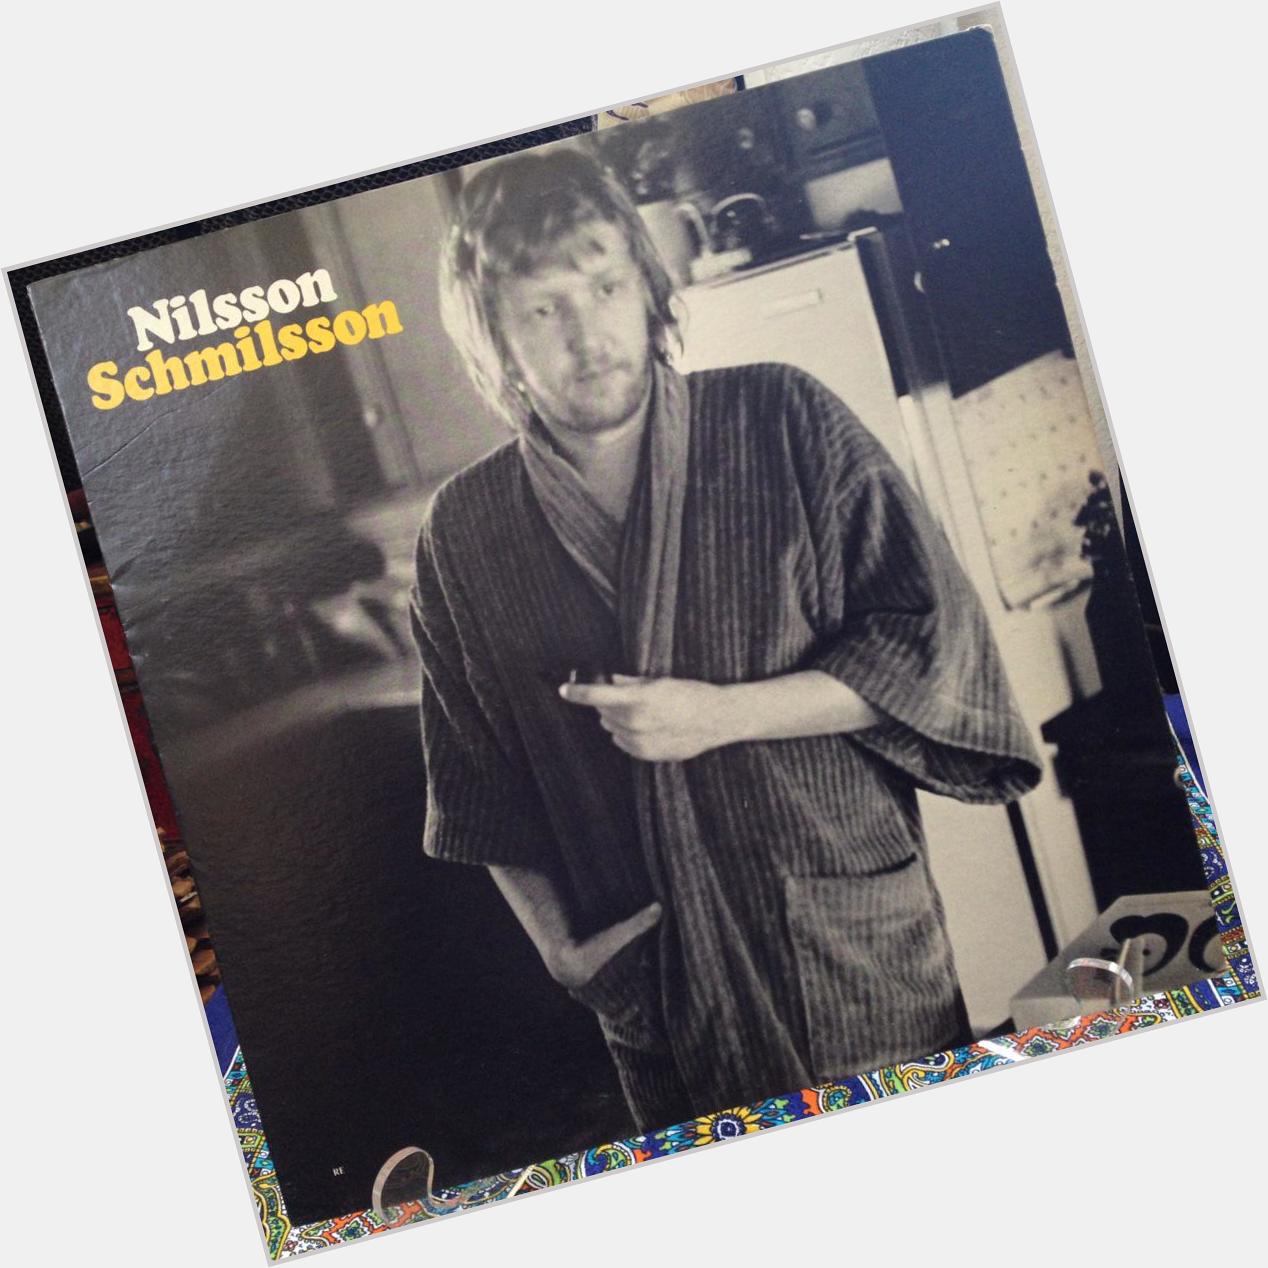 Happy Birthday to Harry Nilsson! What an astounding voice. Missed regularly.   